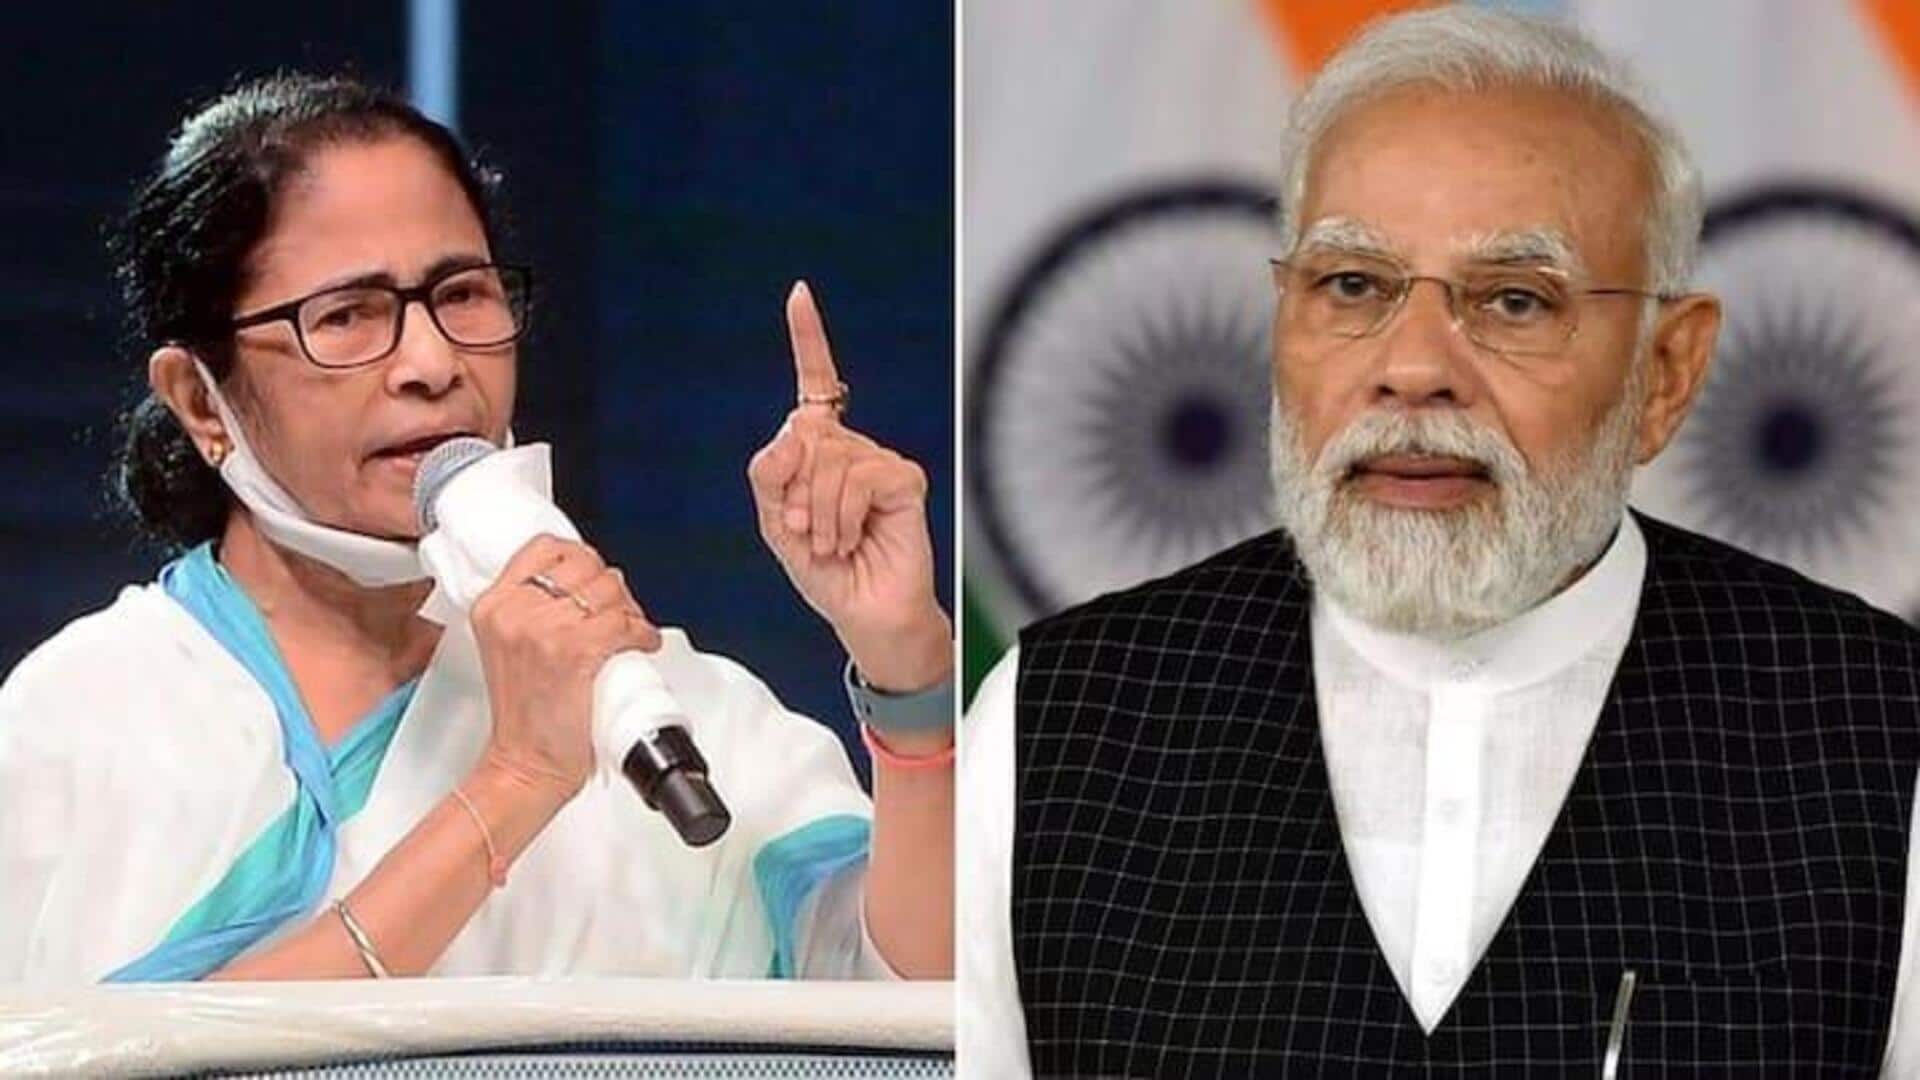 You can trust poisonous snake, but not BJP: Mamata Banerjee 